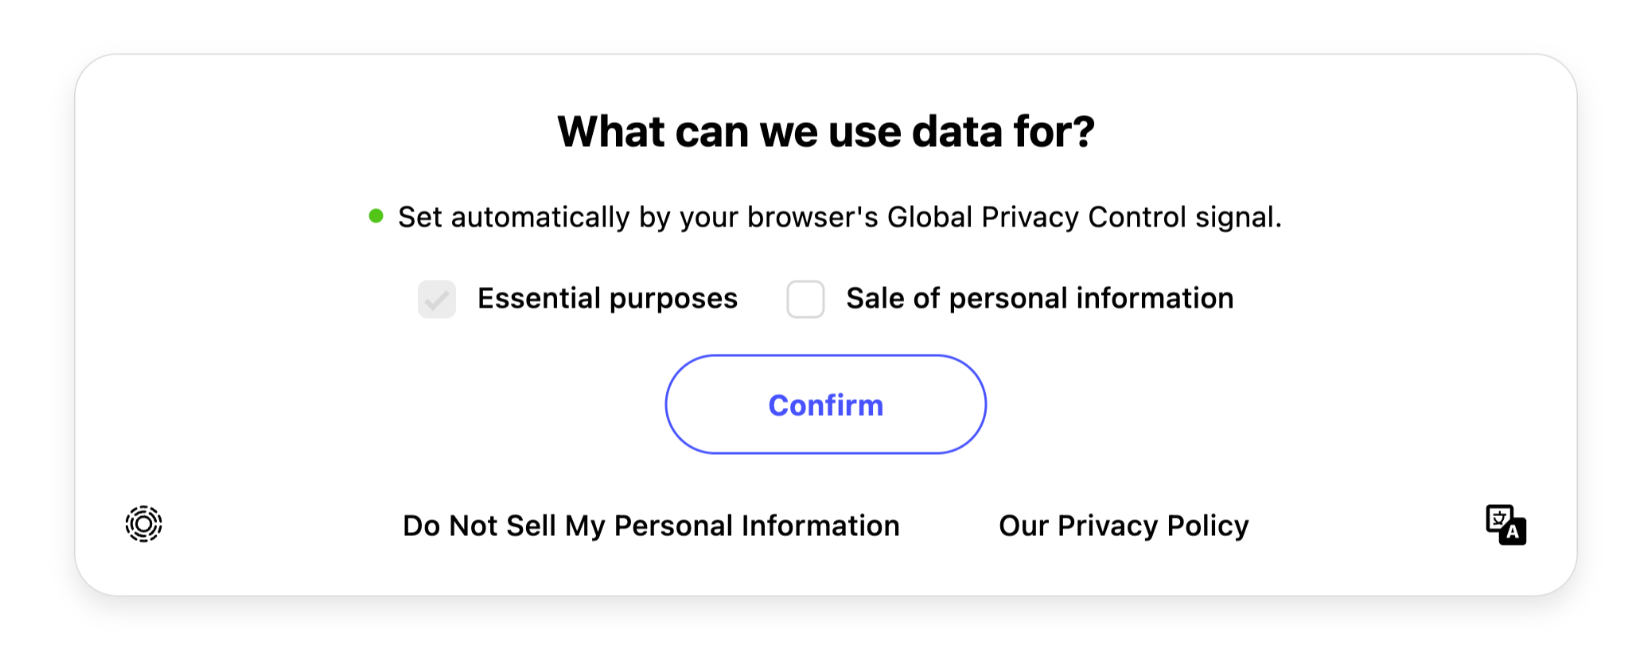 Transcend Consent Manager, showing the detection of the Global Privacy Control